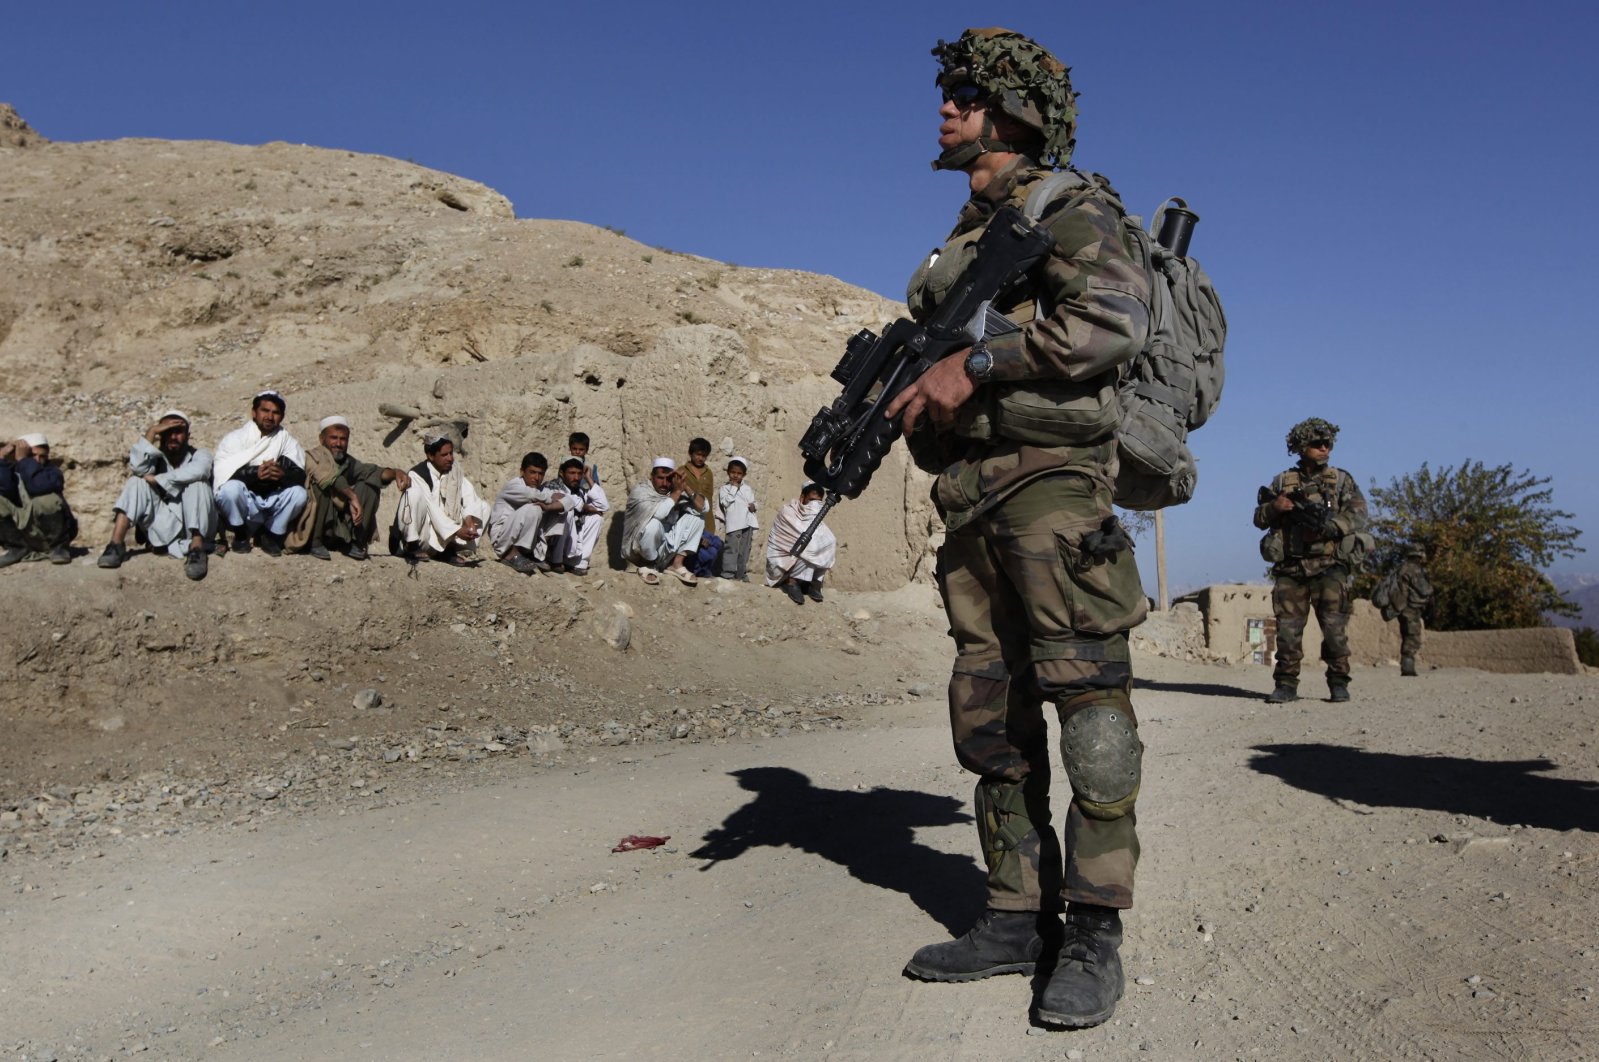 NATO soldiers patrol as Afghan men look on during an operation in the Tagab Valley, Nov. 15, 2009. (AP Photo)